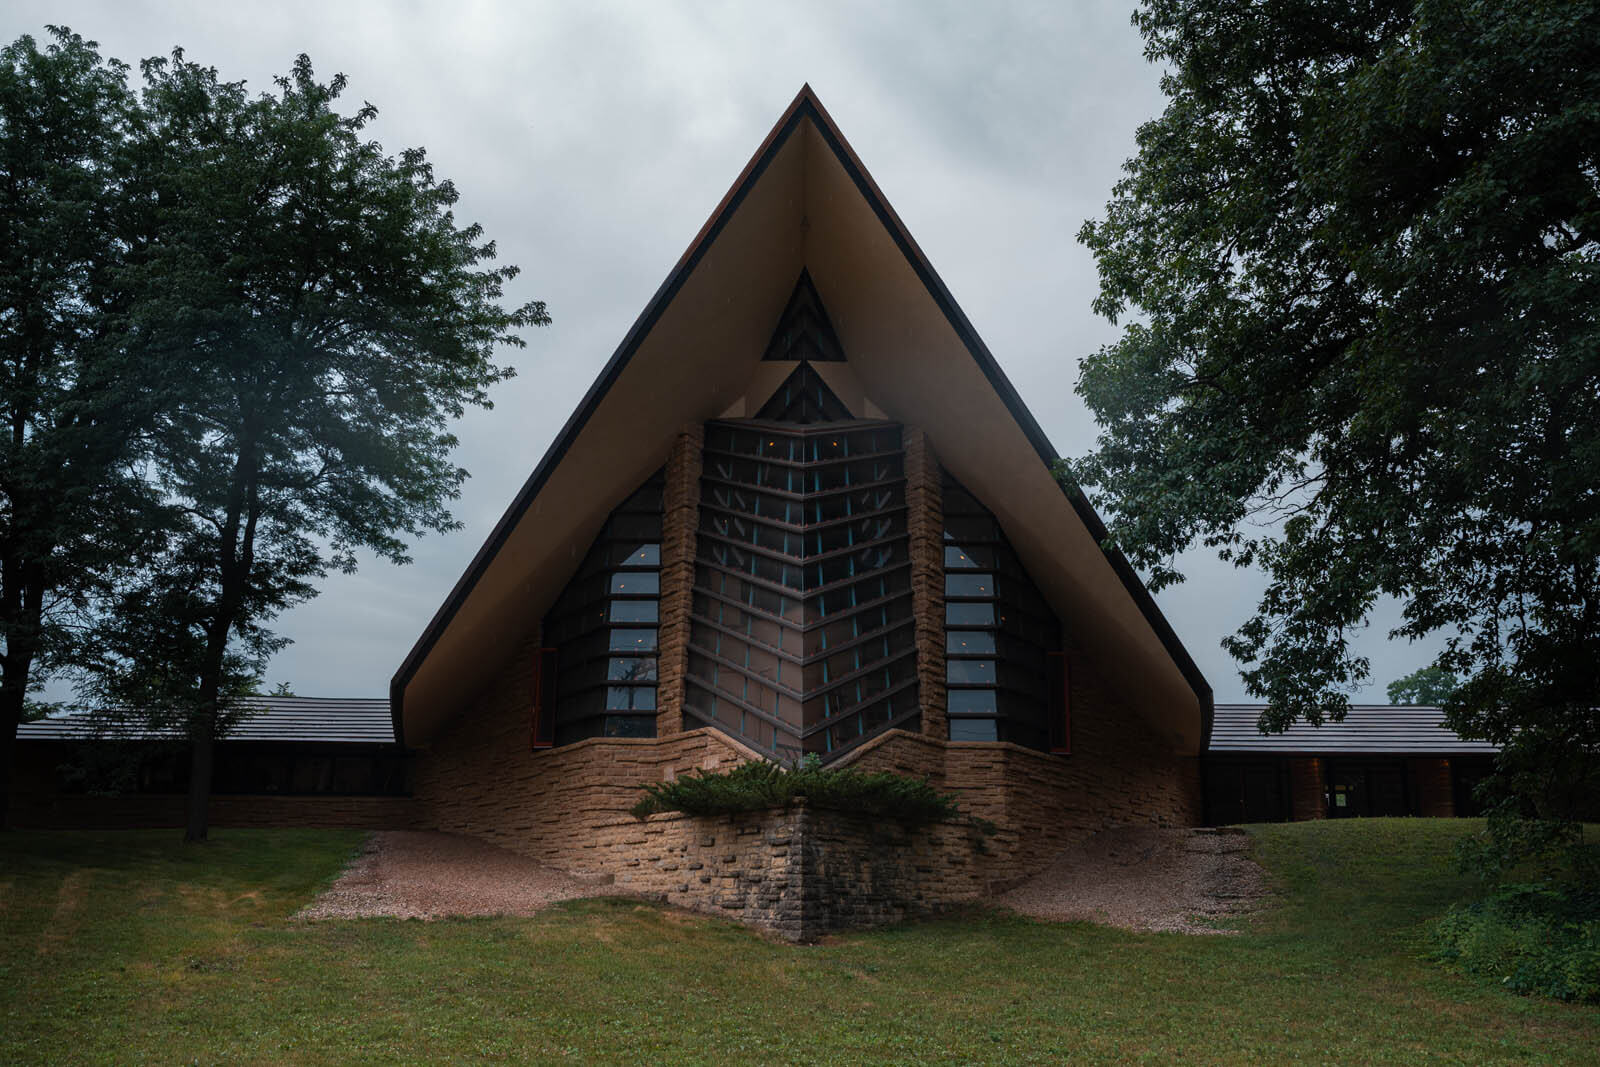 The First Unitarian Meeting House in Madison Wisconsin designed by architect Frank Lloyd Wright